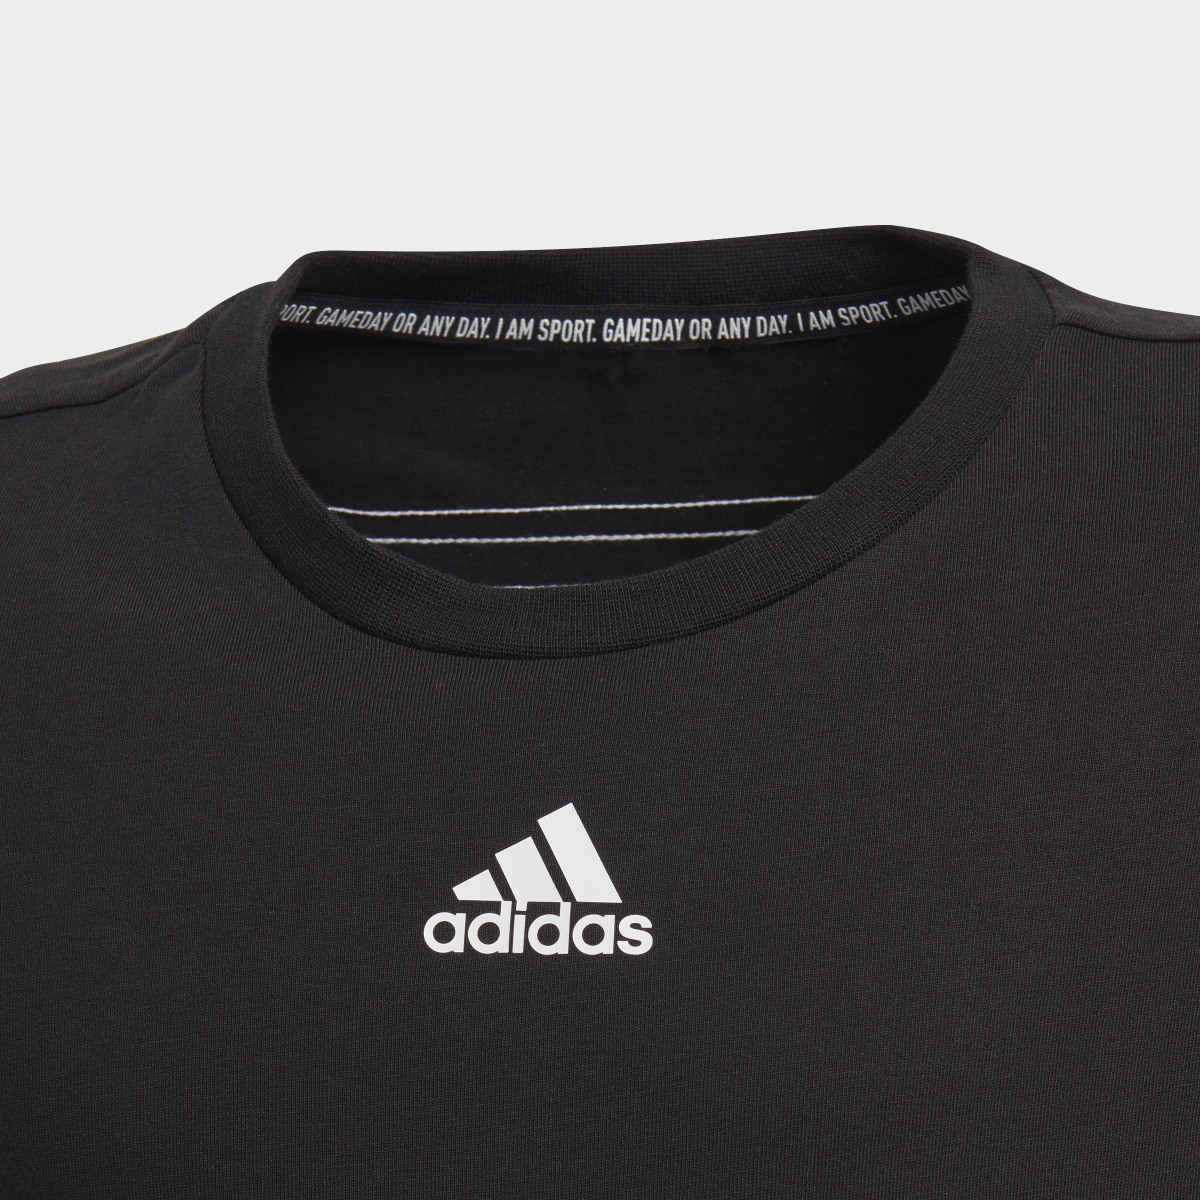 Adidas Must Haves 3-Stripes Tee. 5